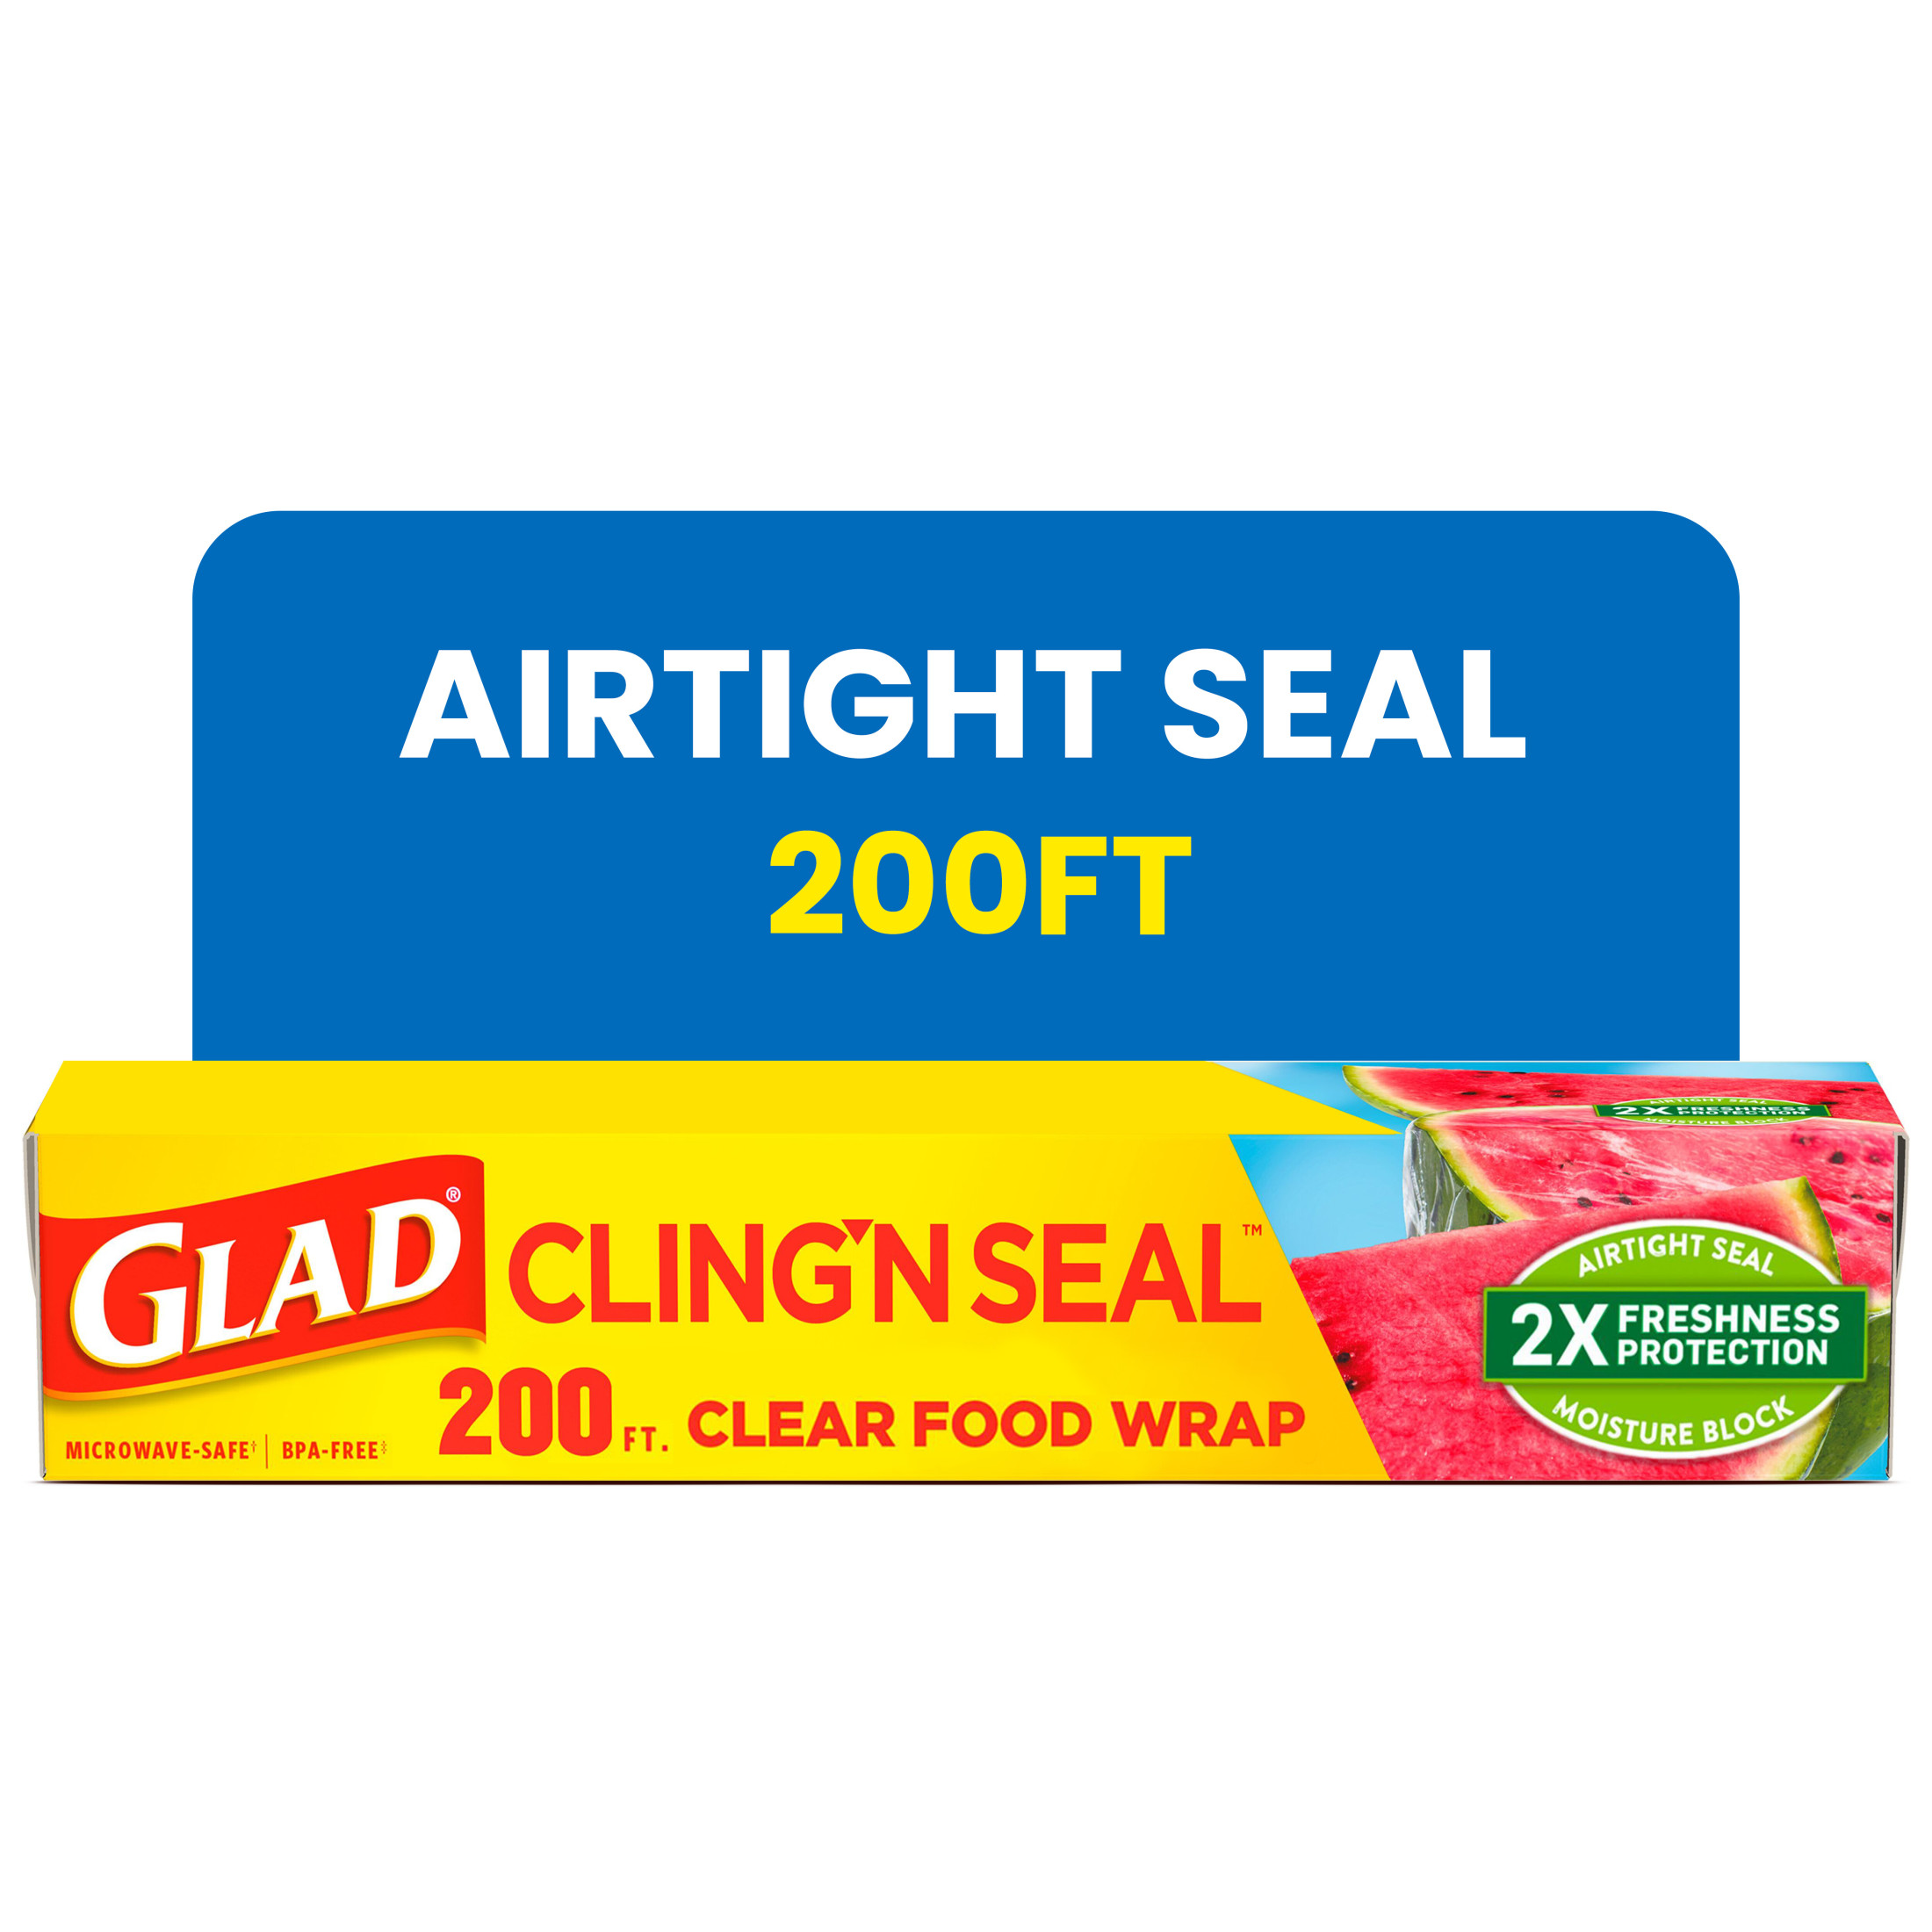 Glad Cling N Seal Plastic Food Wrap, 200 sq ft Roll - image 1 of 9